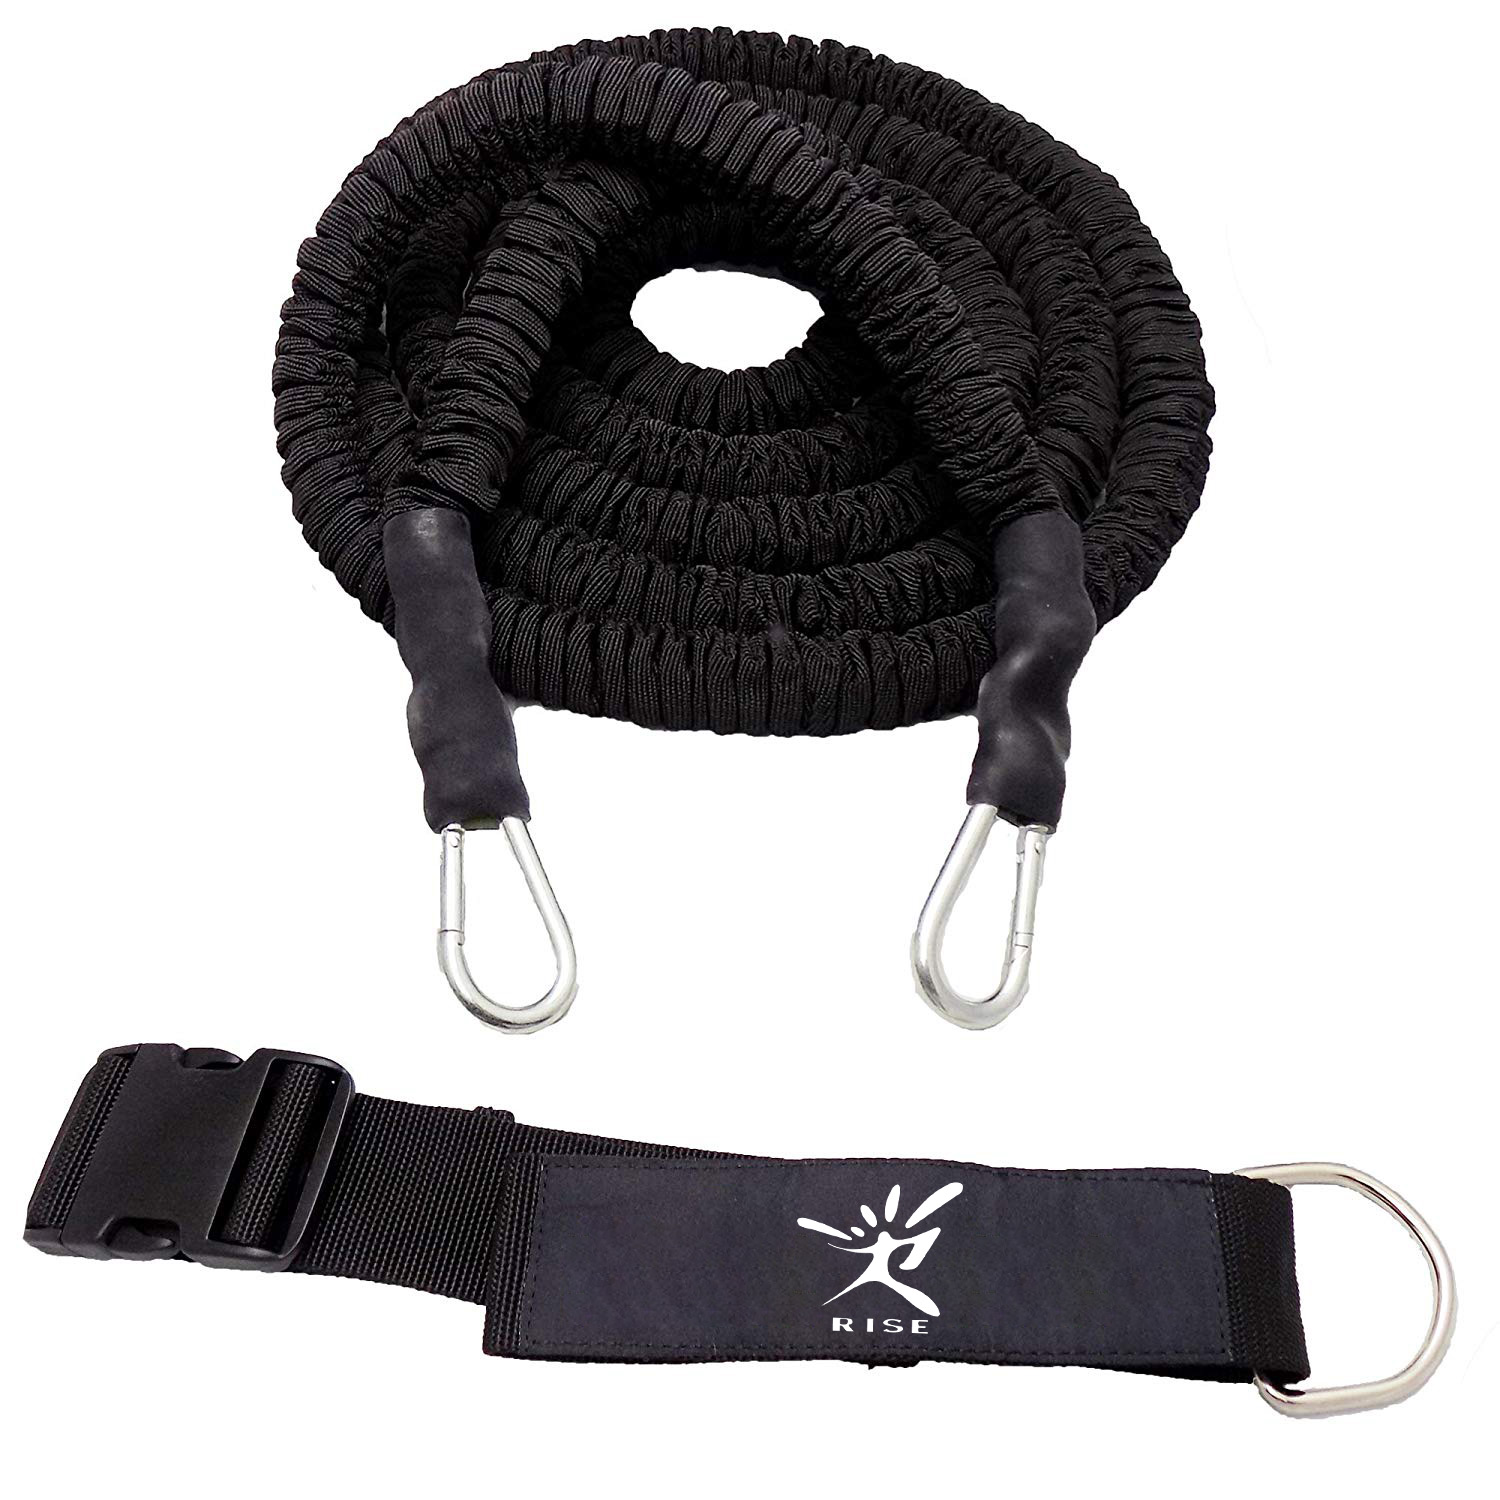 resistance bungee cord